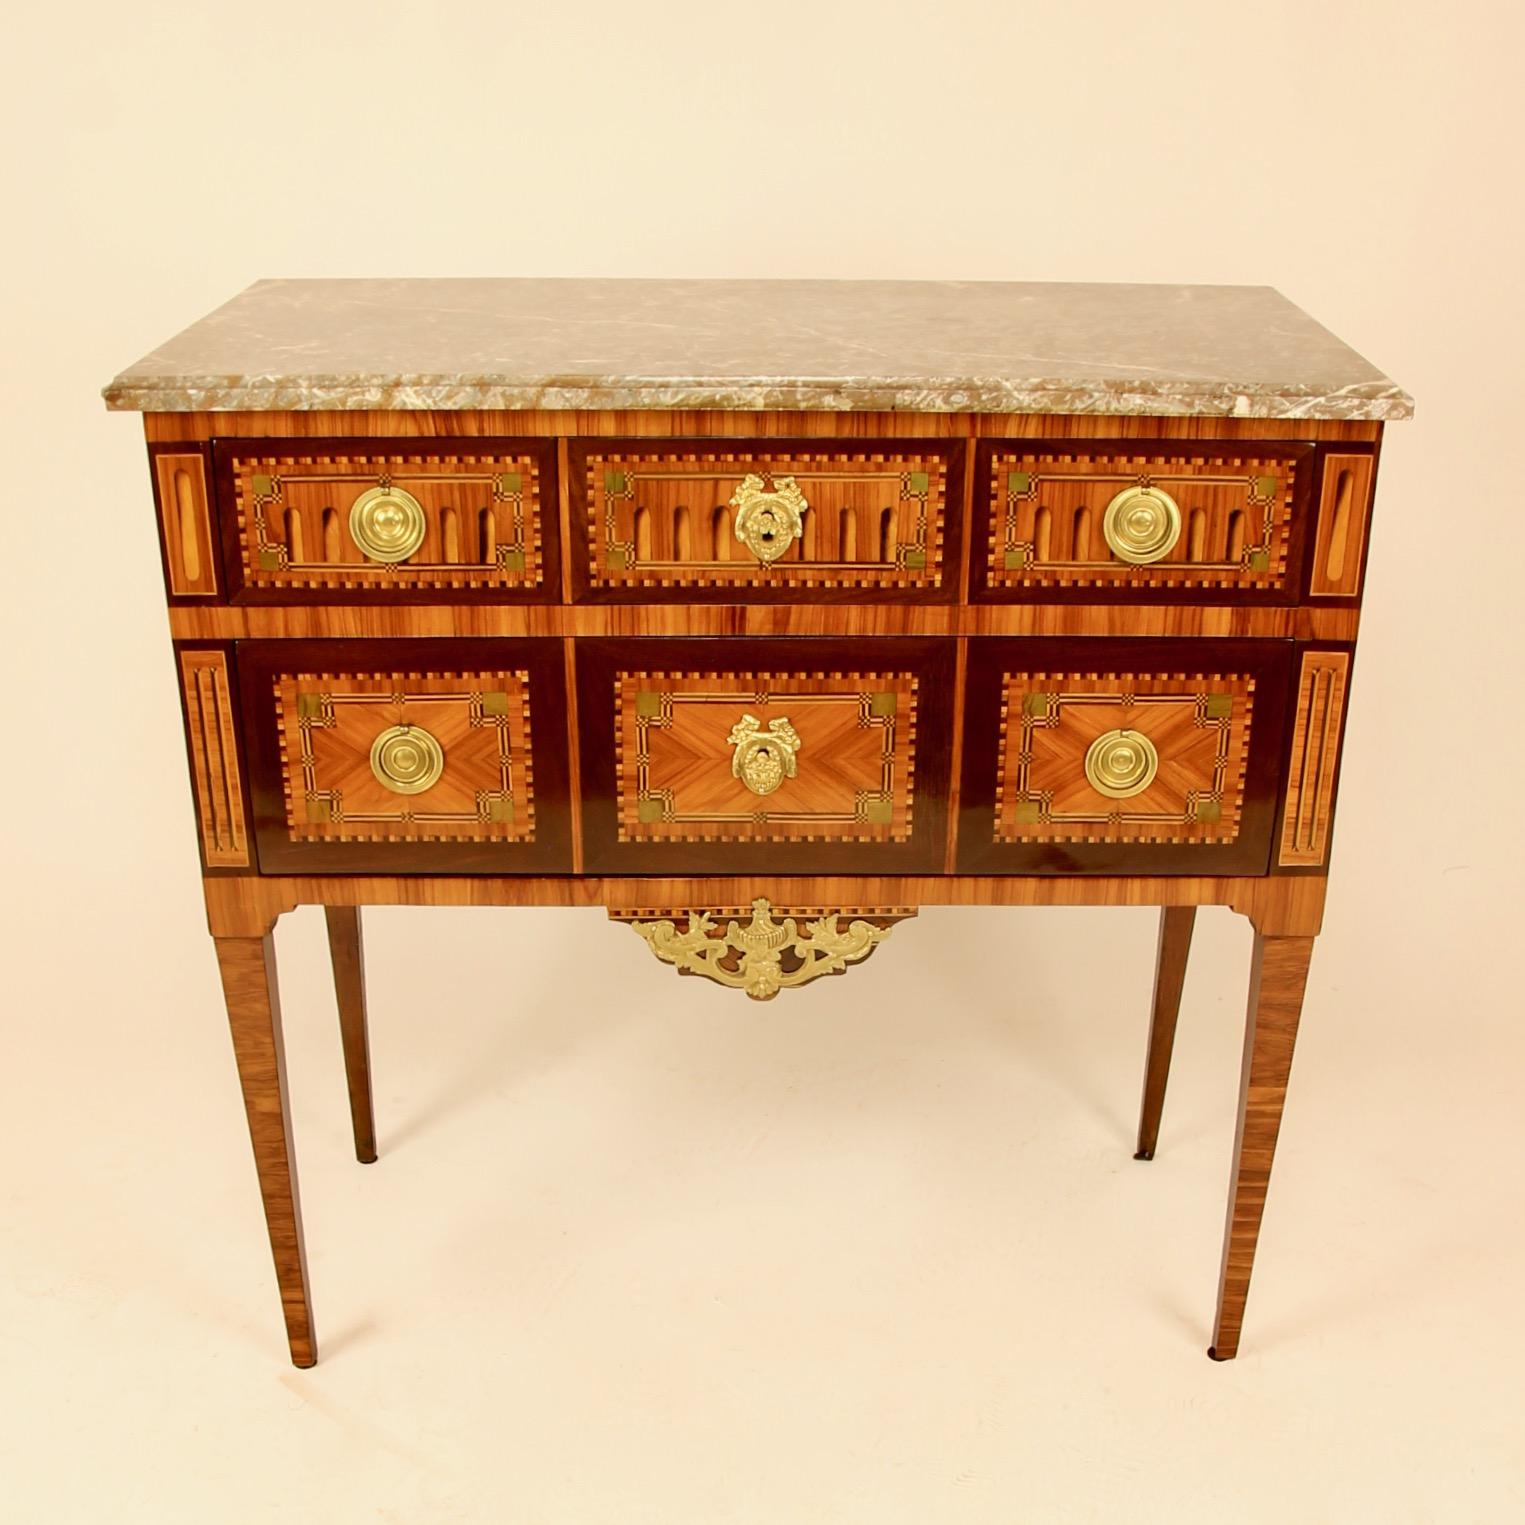 18th century Louis XVI neoclassical Marquetry commode or chest of drawers, so-called 